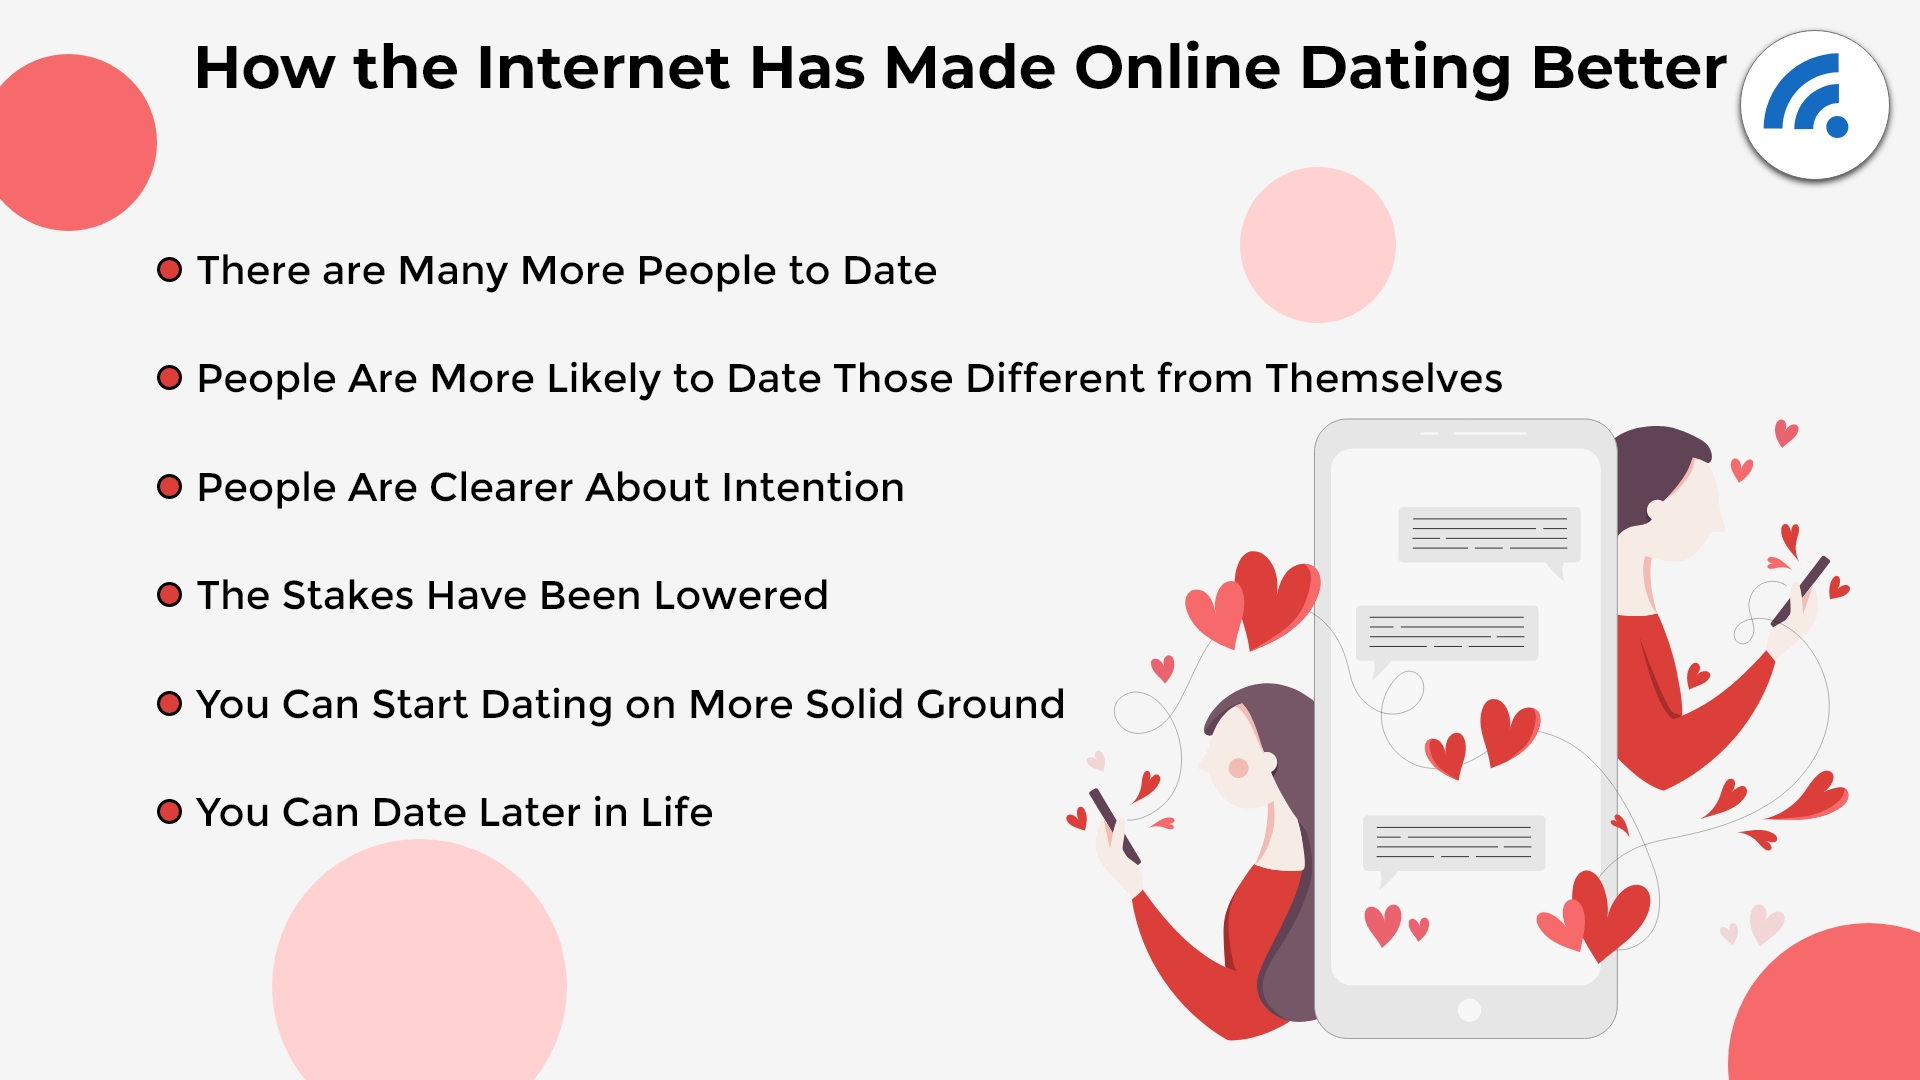 How many first dates have there been on online dating?